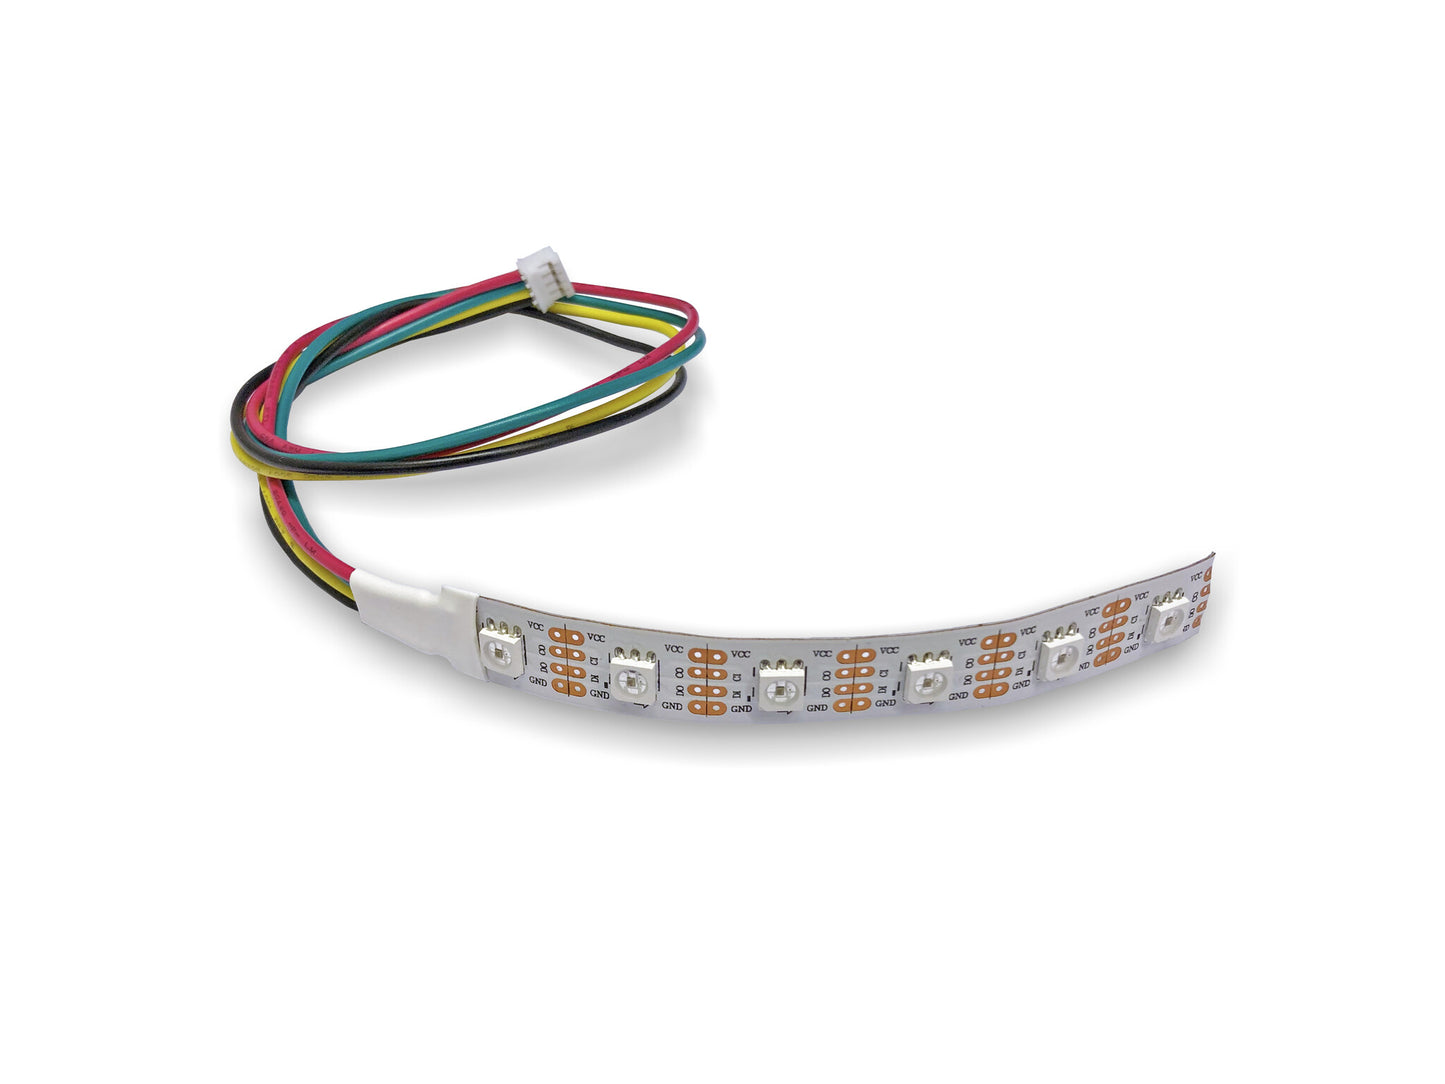 Nexmosphere 100cm LED strip 60L/m Warm White 12V, 180cm cable DC 2.1mm connector 90'angle